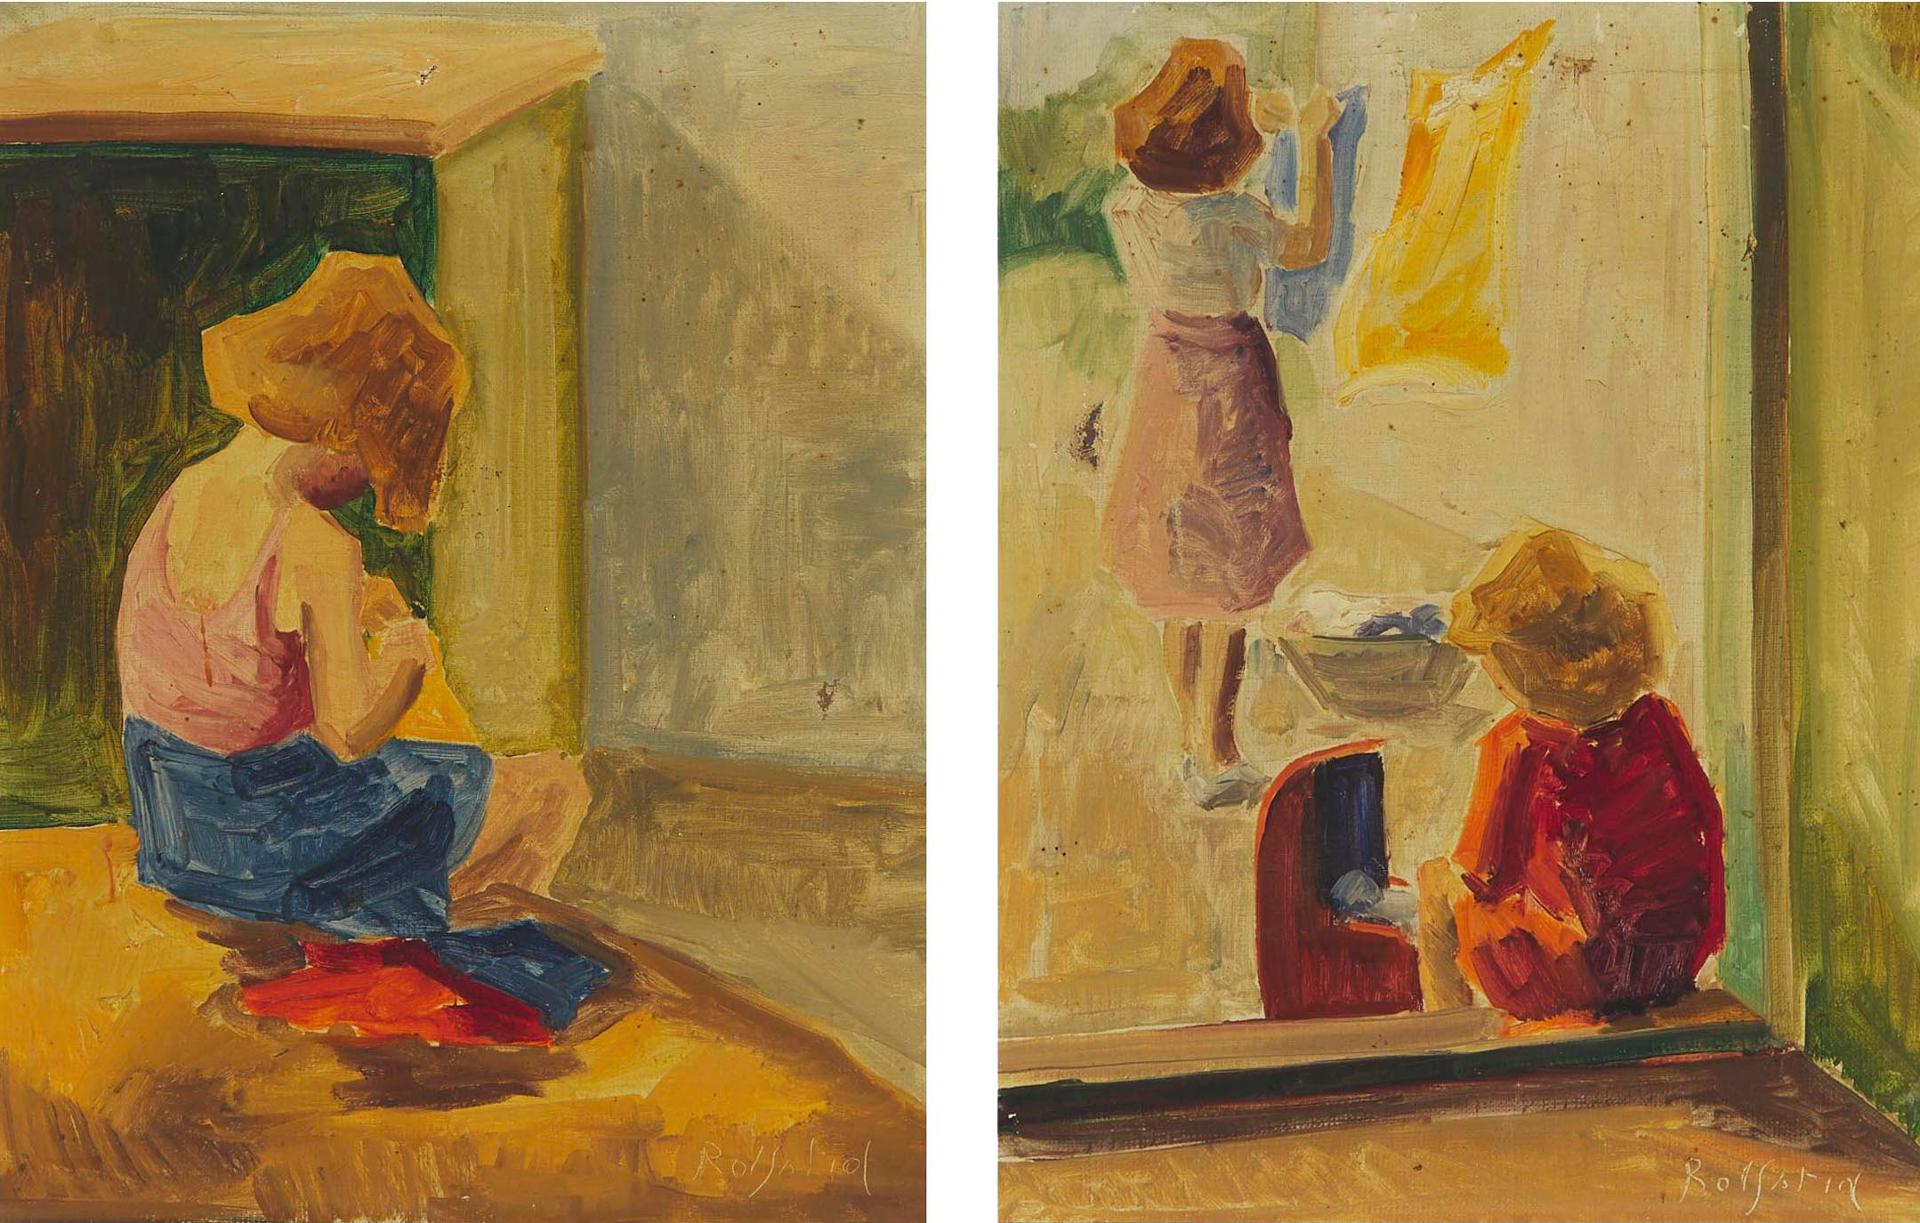 Bernhardt Daniel Rolfsted (1905) - Watching Mother On Laundry Day; Changing Clothes, Circa 1940s